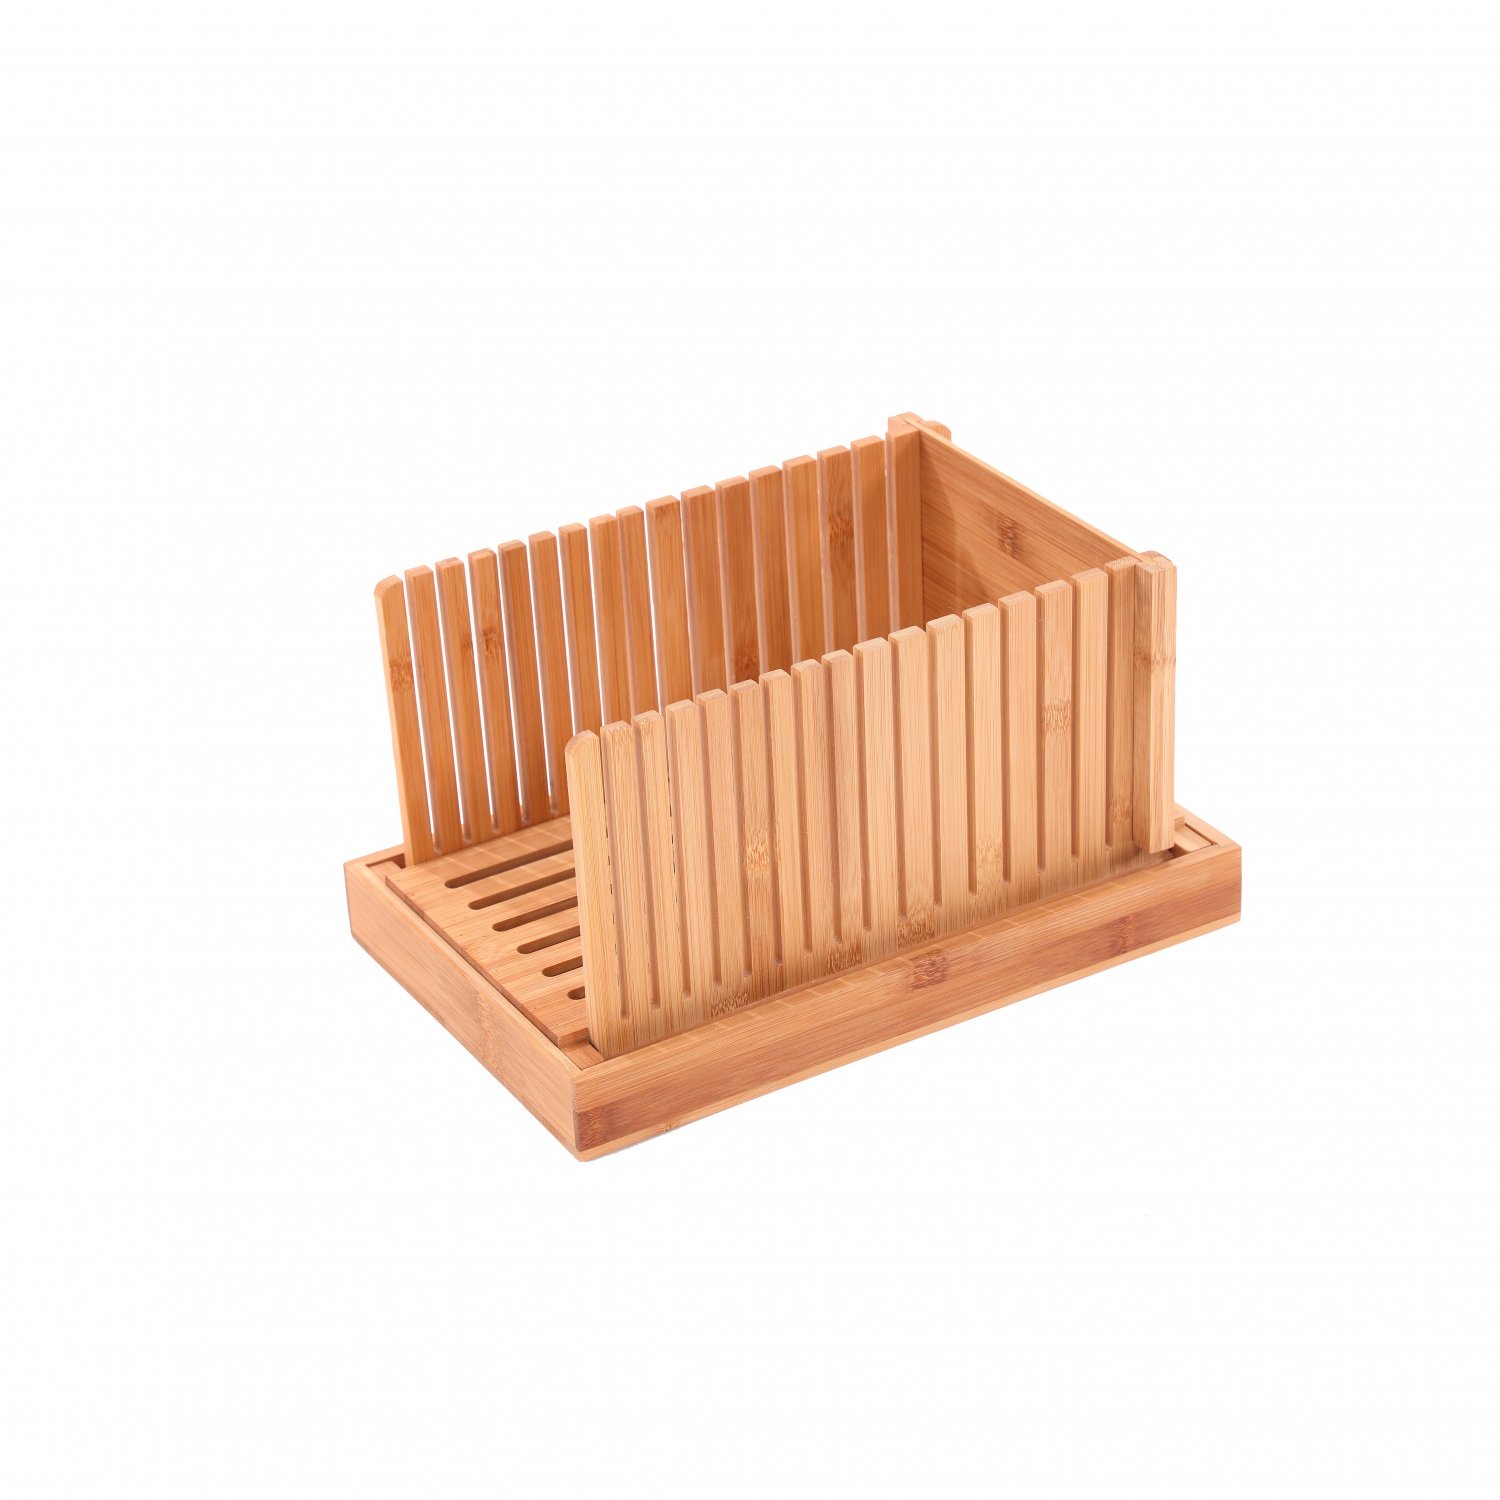 Bamboo Wooden Bread Slicer Chopping Cutting Board with Crumb Cat